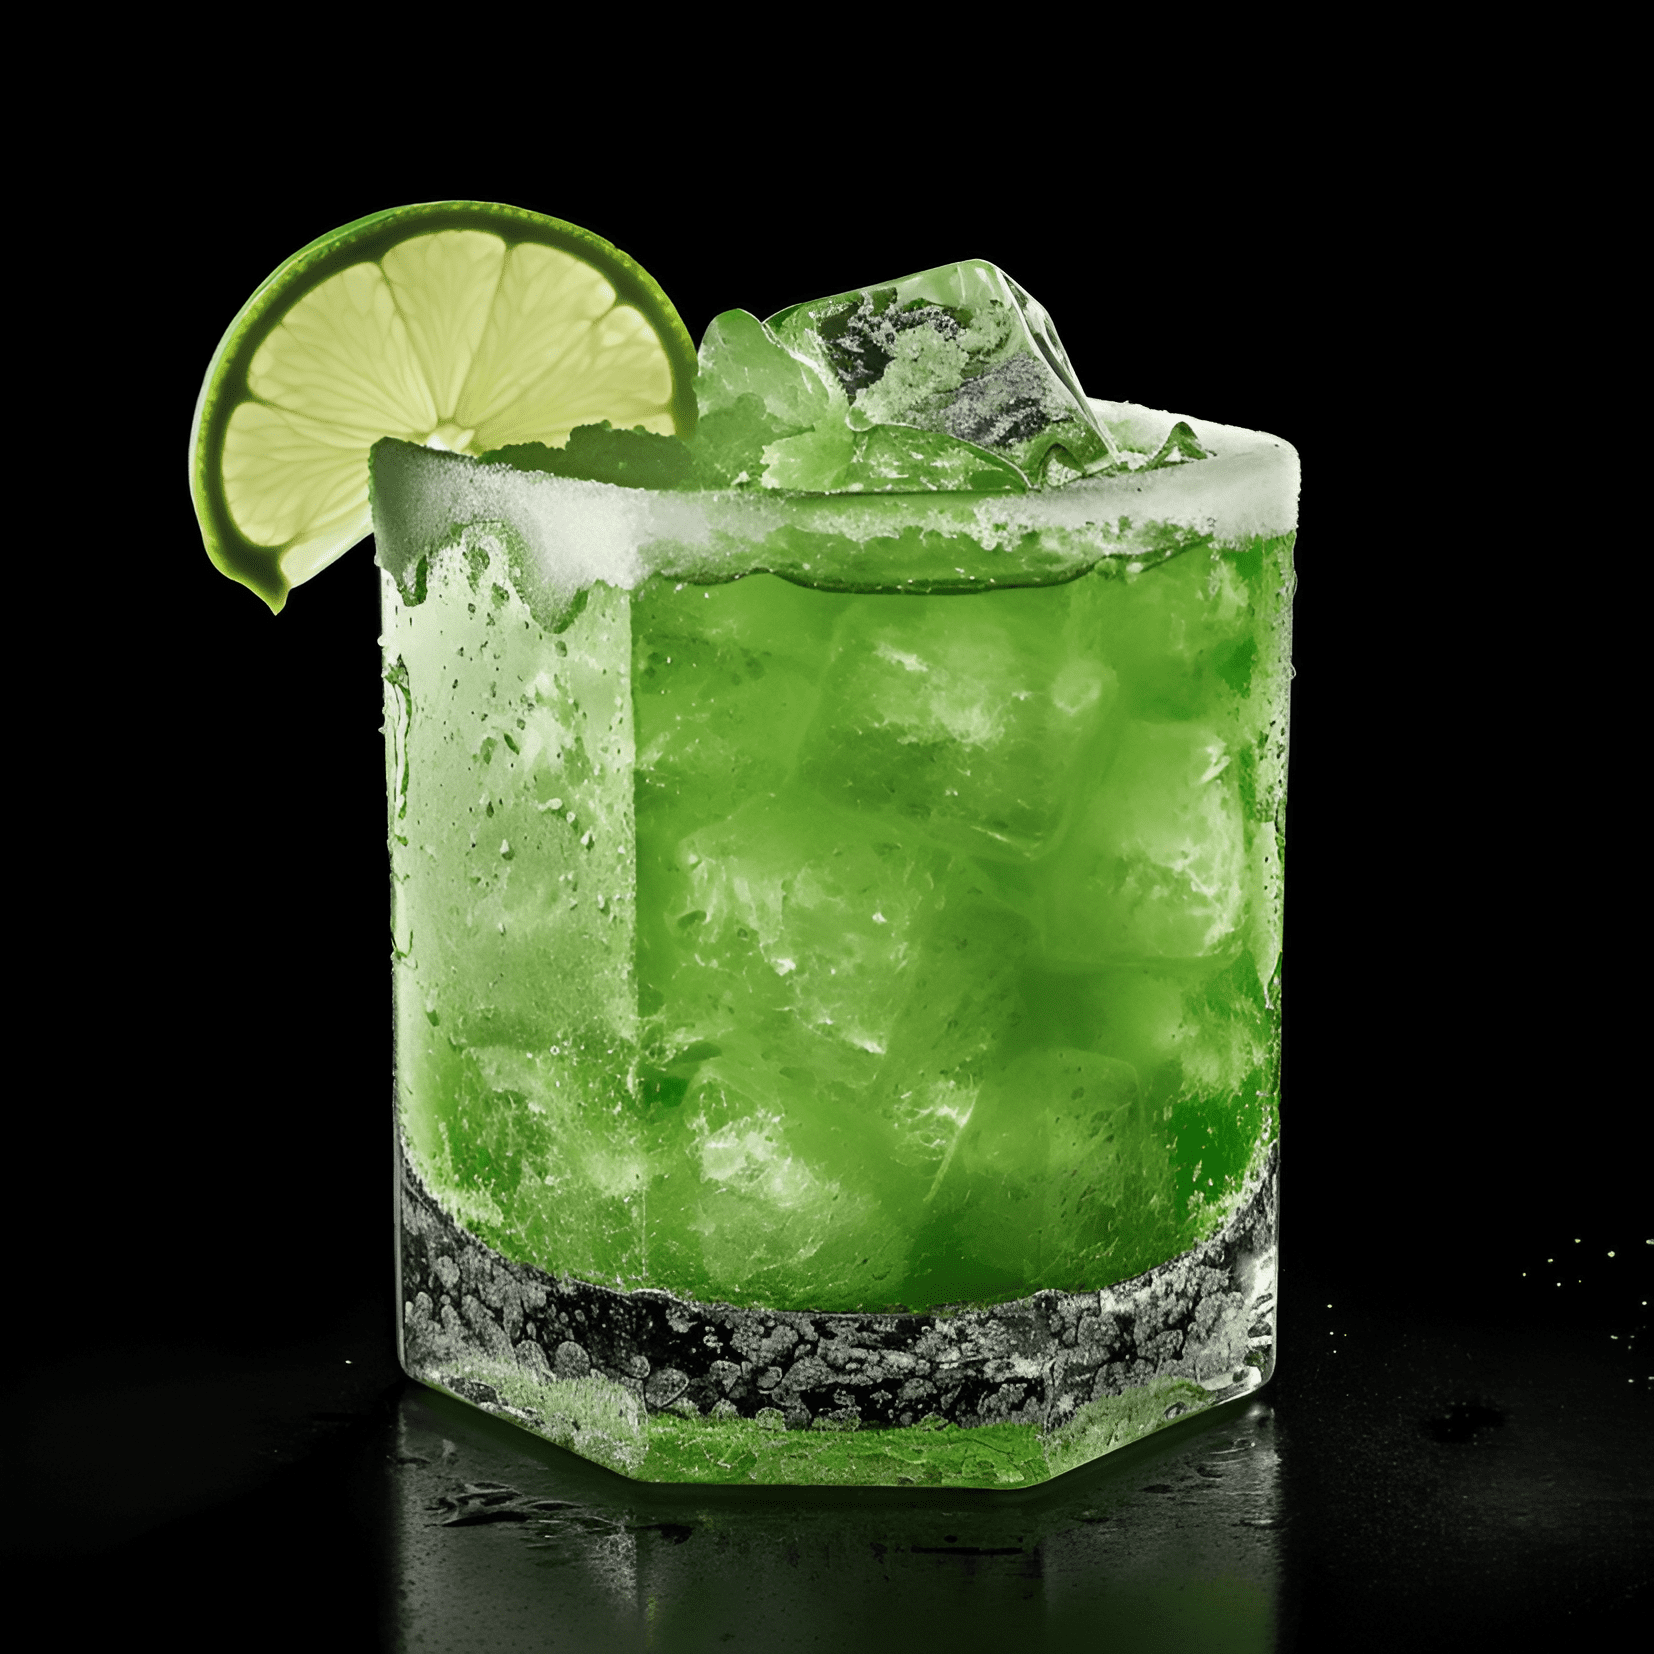 Brazilian Cocktail Recipe - The Caipirinha has a perfect balance of sweet, sour, and strong flavors. The cachaça provides a robust and earthy base, while the lime adds a tangy and refreshing sourness. The sugar helps to mellow out the strong flavors and adds a touch of sweetness to the drink.